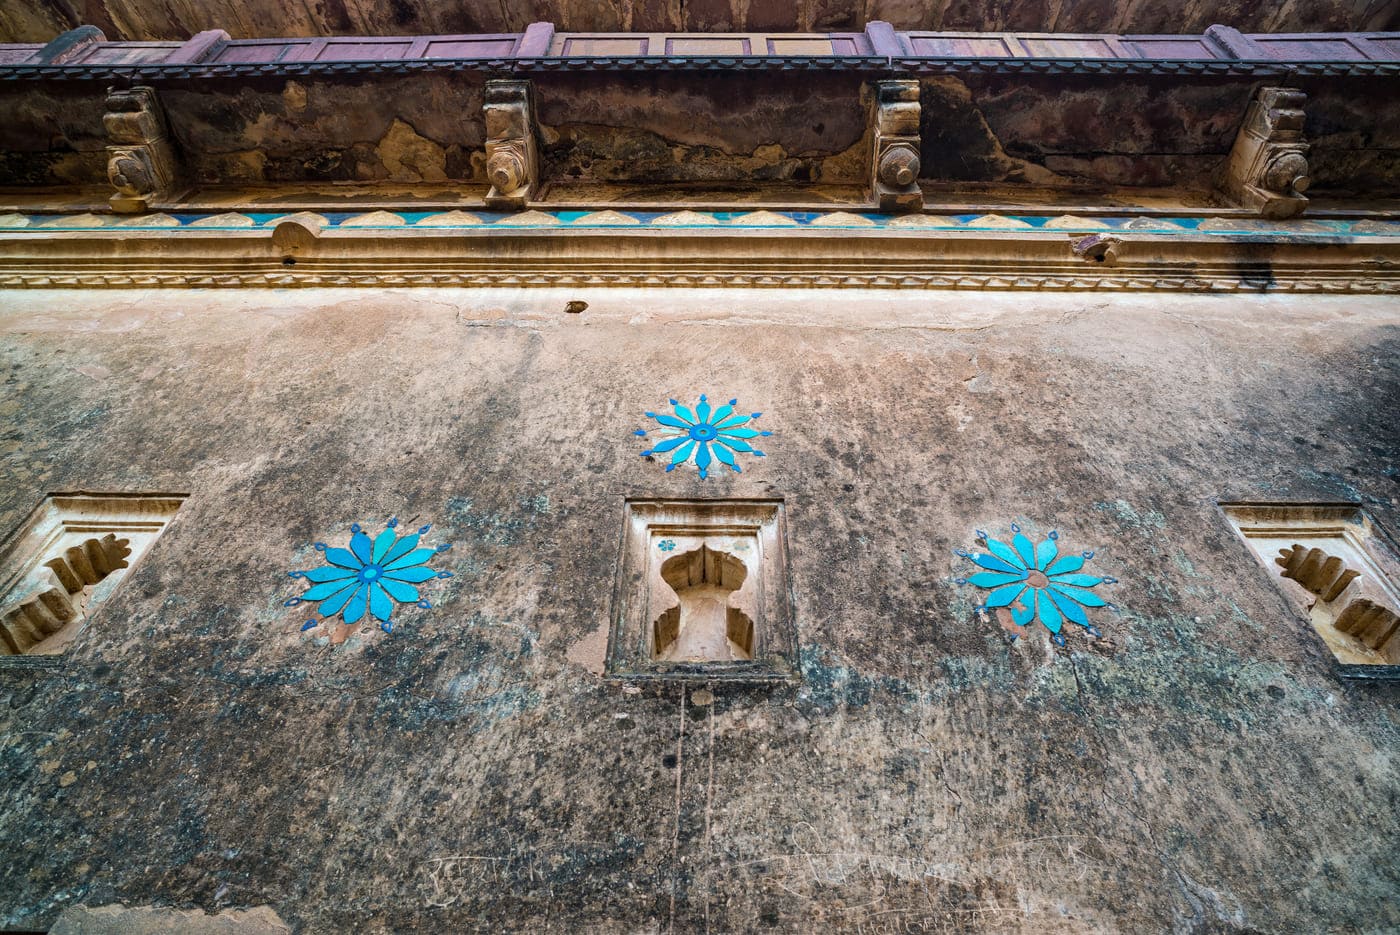 Floral inlays done in vivid blue tiles decorate a wall painting, Orchha 